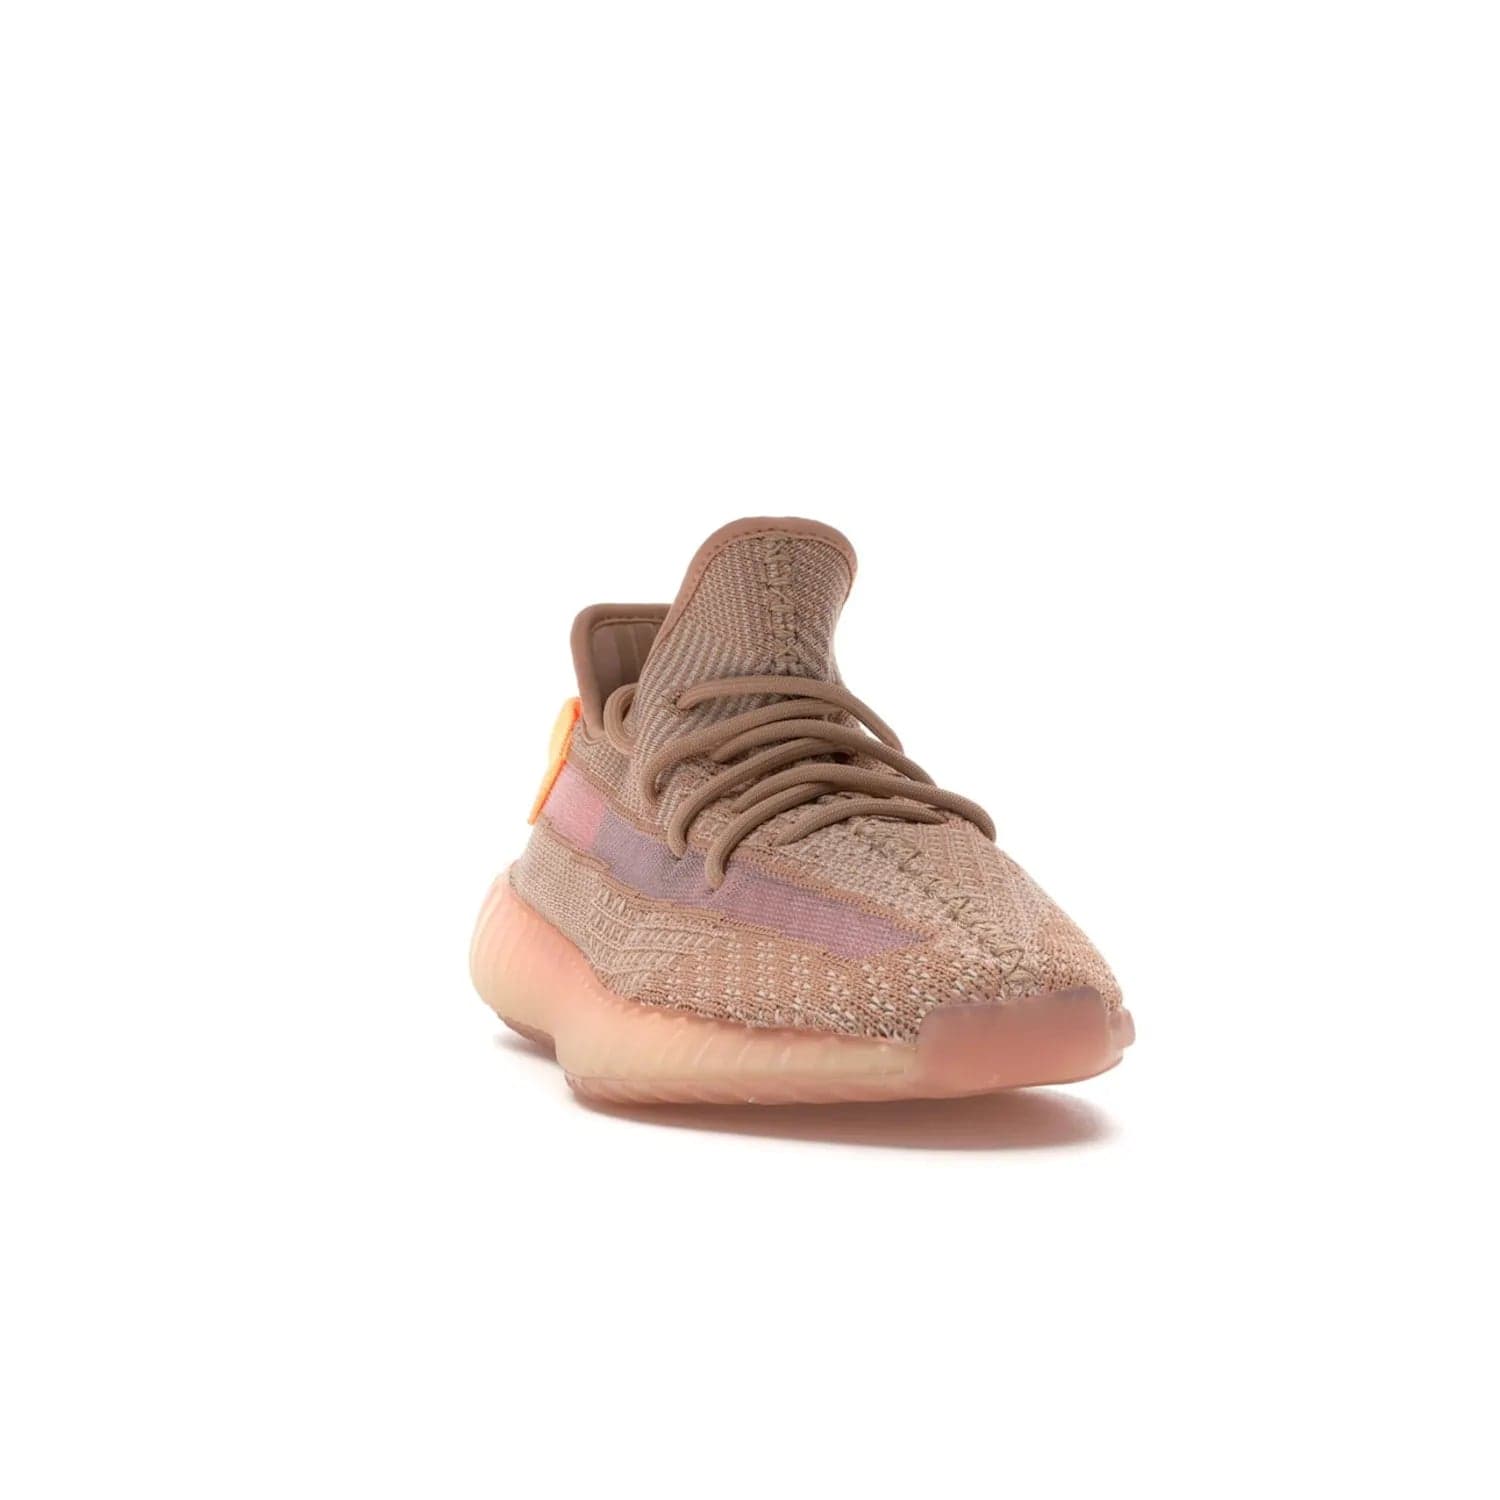 adidas Yeezy Boost 350 V2 Clay - Image 8 - Only at www.BallersClubKickz.com - The adidas Yeezy Boost 350 V2 Clay - style and swag in one shoe. Orange accents, clay midsole and sole. Get yours today!